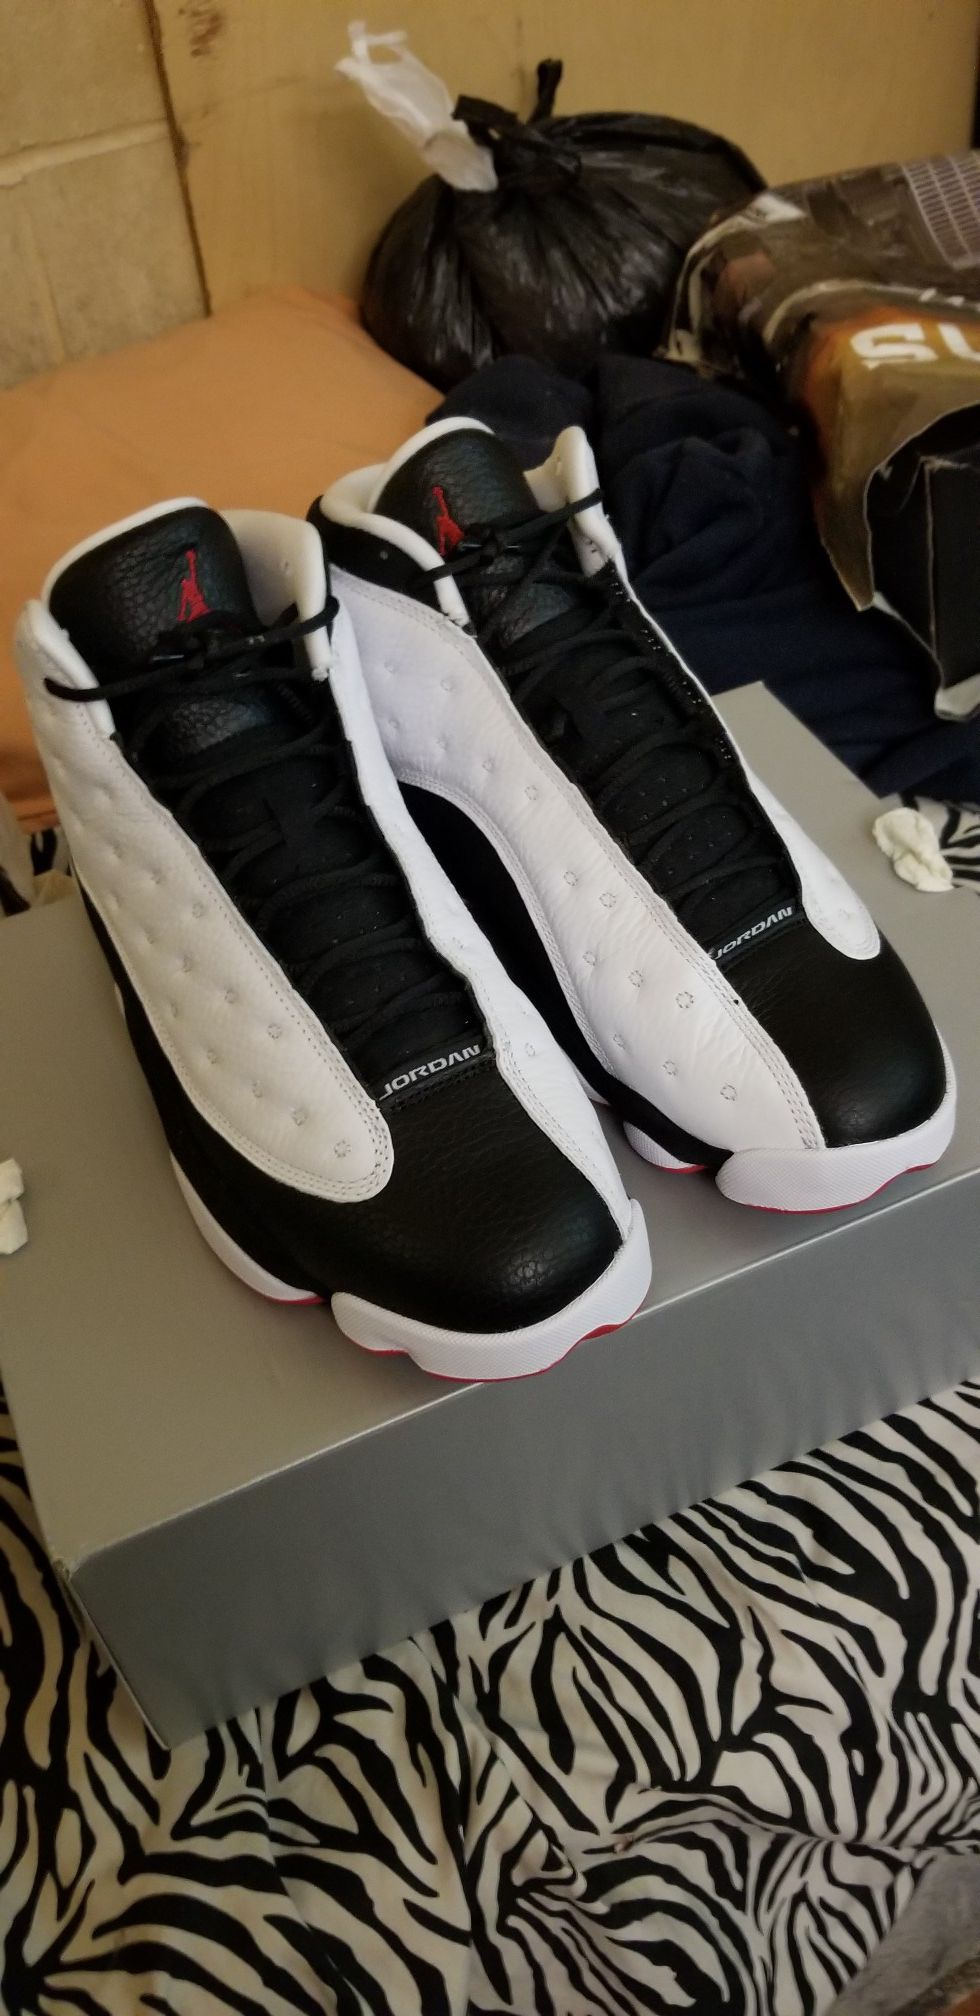 Jordan's 13 Size 10 and a 1/2